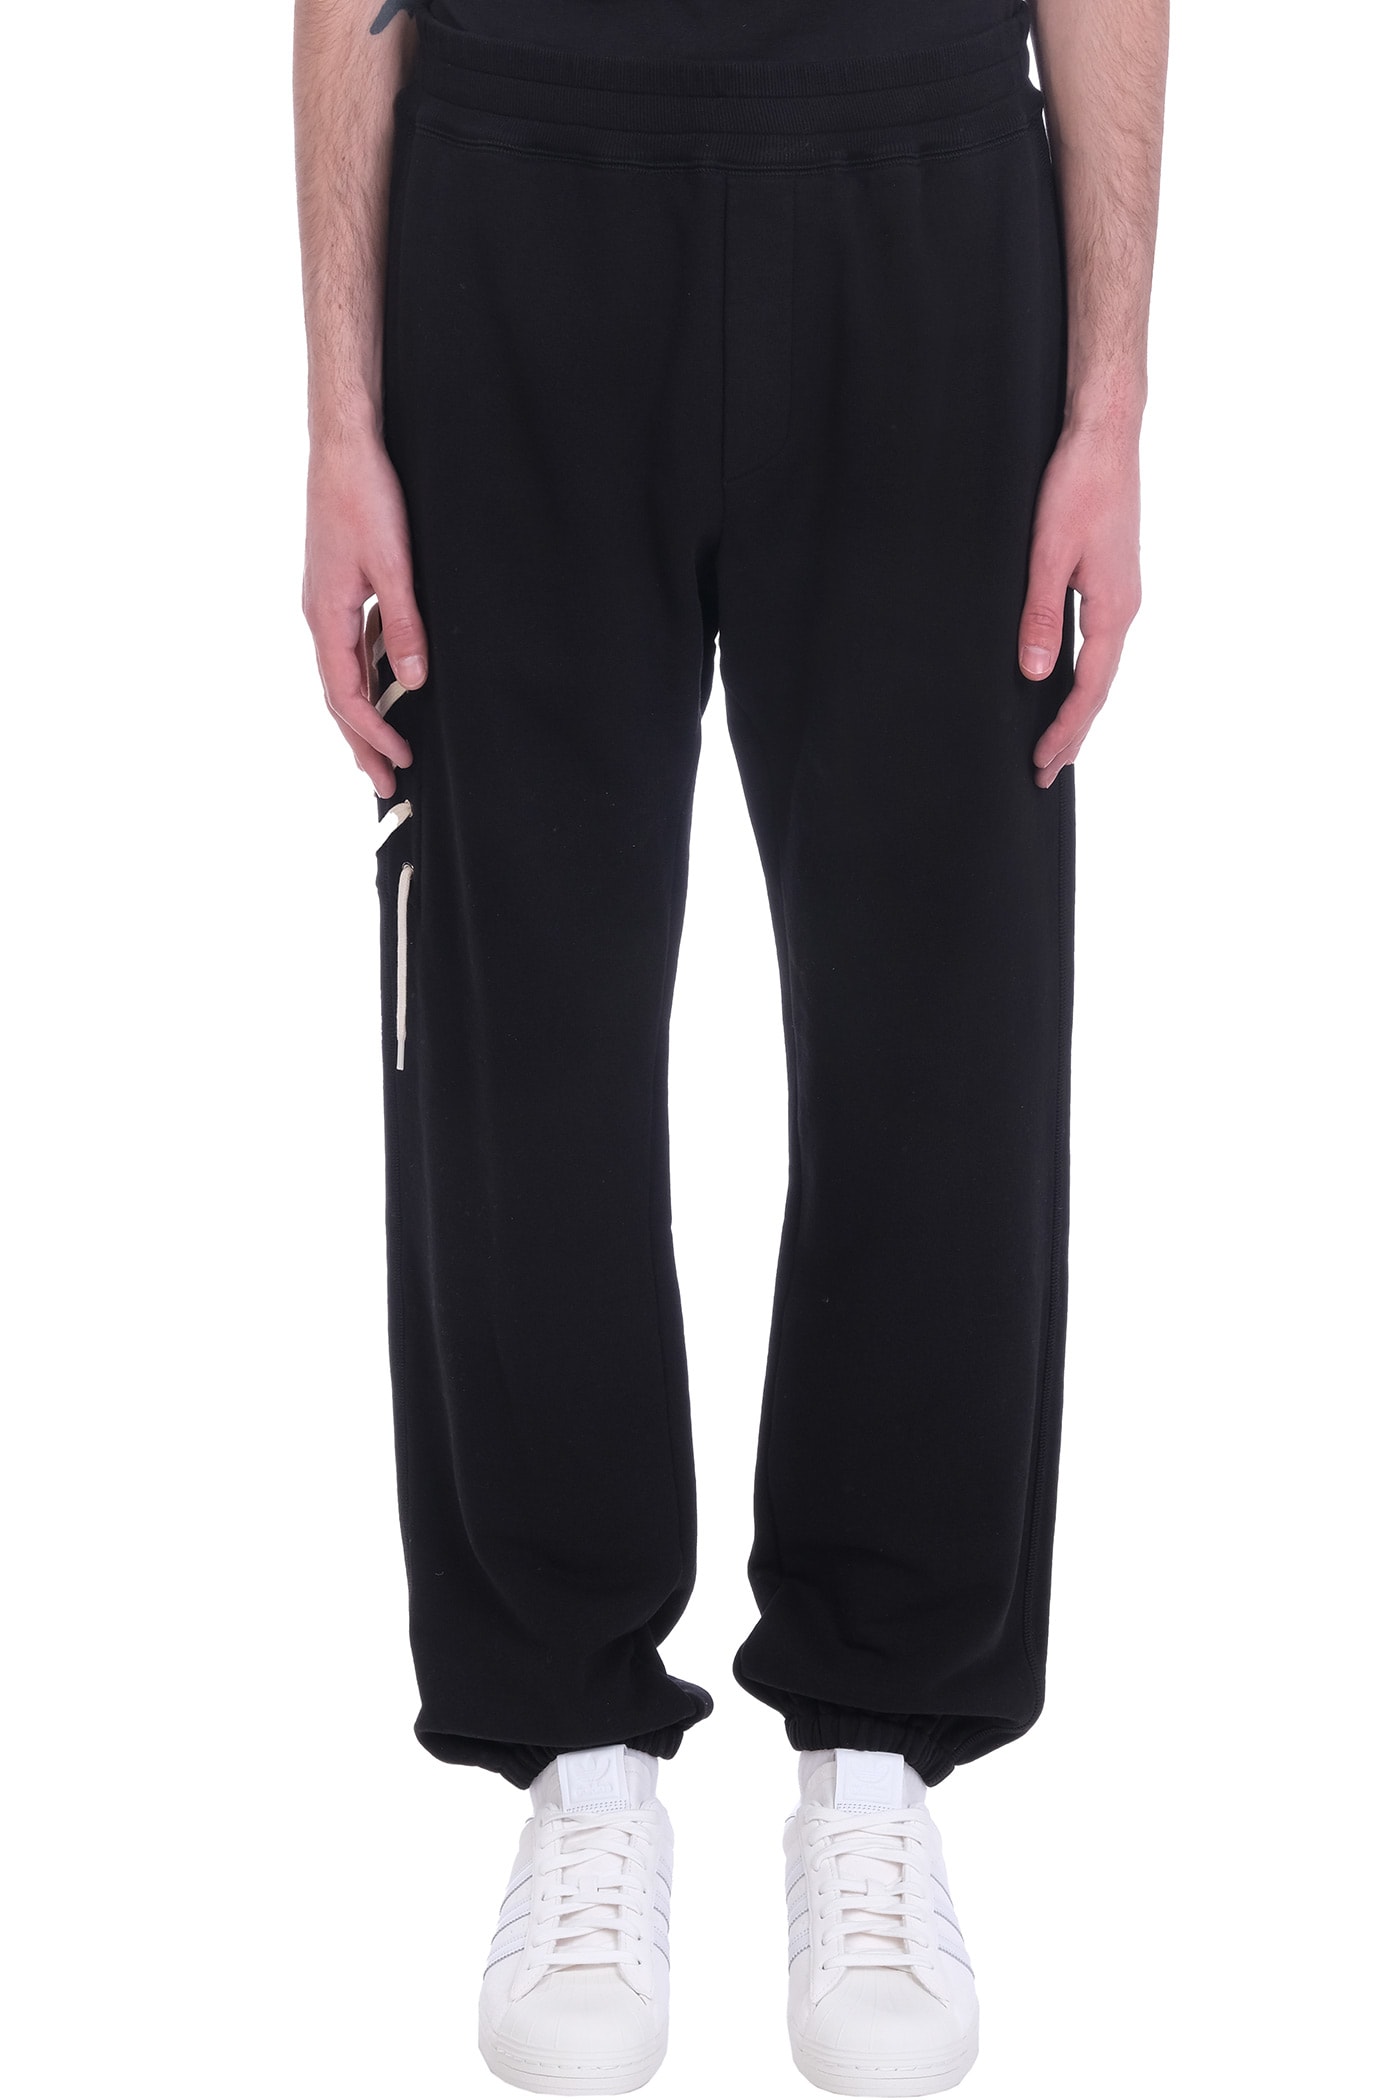 Craig Green Laced Pants In Black Cotton